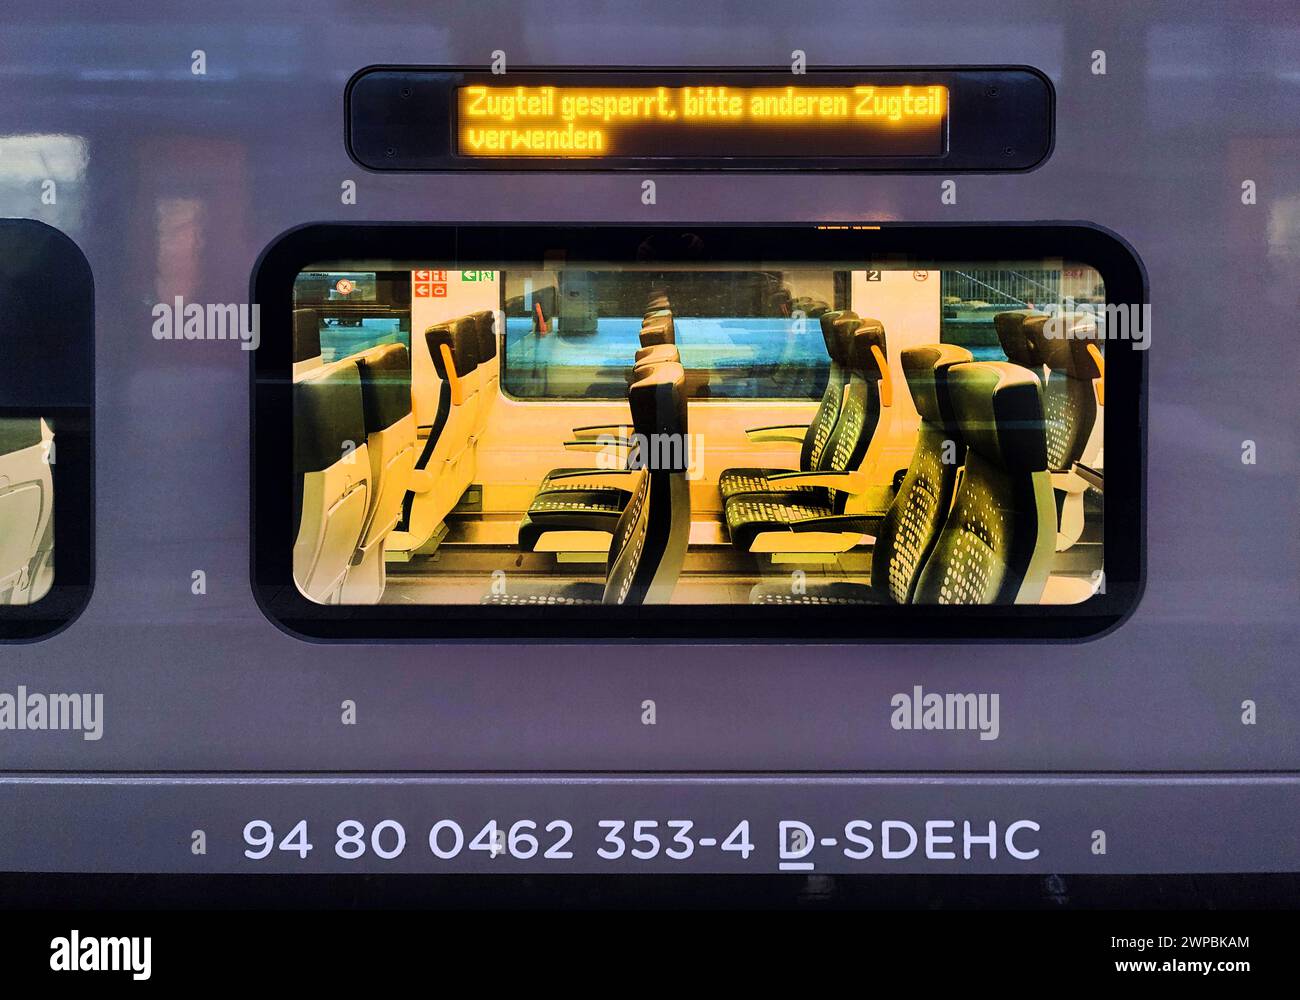 Train section blocked, illuminated sign on a local train at the main station in the evening, Germany, North Rhine-Westphalia, Lower Rhine, Dusseldorf Stock Photo